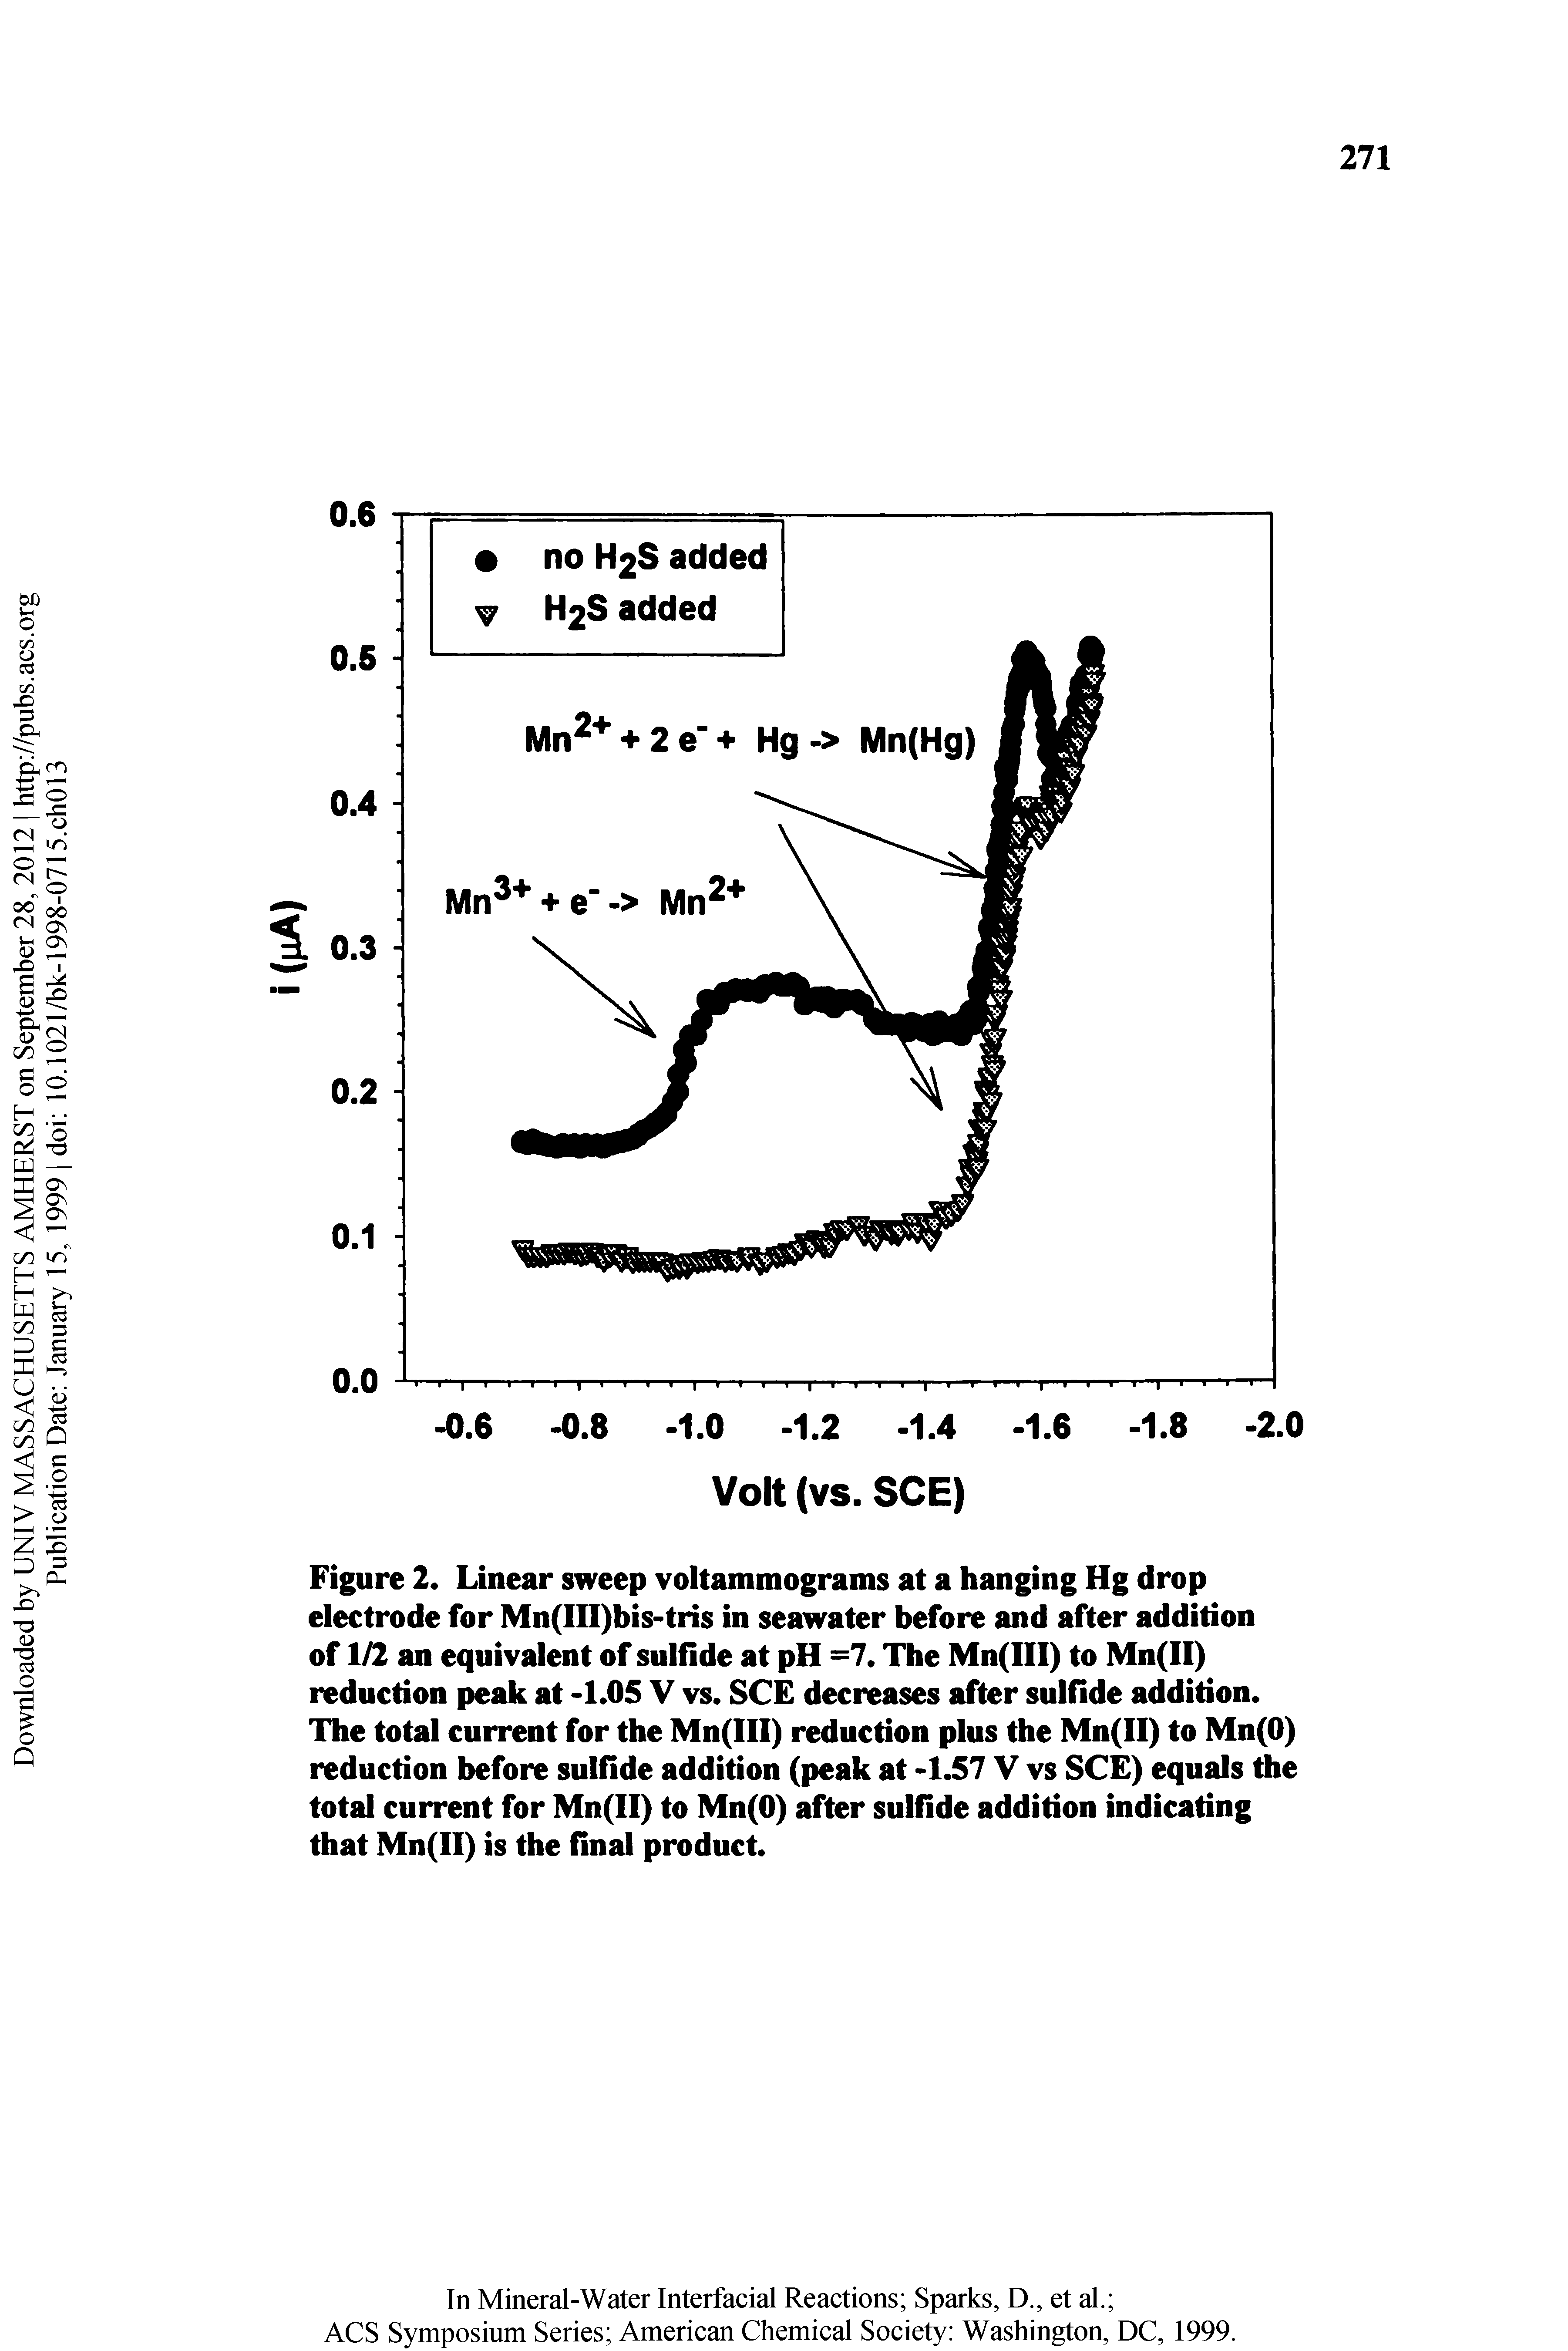 Figure 2. Linear sweep voltammograms at a hanging Hg drop electrode for Mn(III)bis-tris in seawater before and after addition of 1/2 an equivalent of sulfide at pH =7. The Mn(III) to Mn(ll) reduction peak at -1.05 V vs. SCE decreases after sulfide addition. The total current for the Mn(IlI) reduction plus the Mn(II) to Mn(0) reduction before sulfide addition (peak at -1.57 V vs SCE) equals the total current for Mn(II) to Mn(0) after sulfide addition indicating that Mn(II) is the final product.